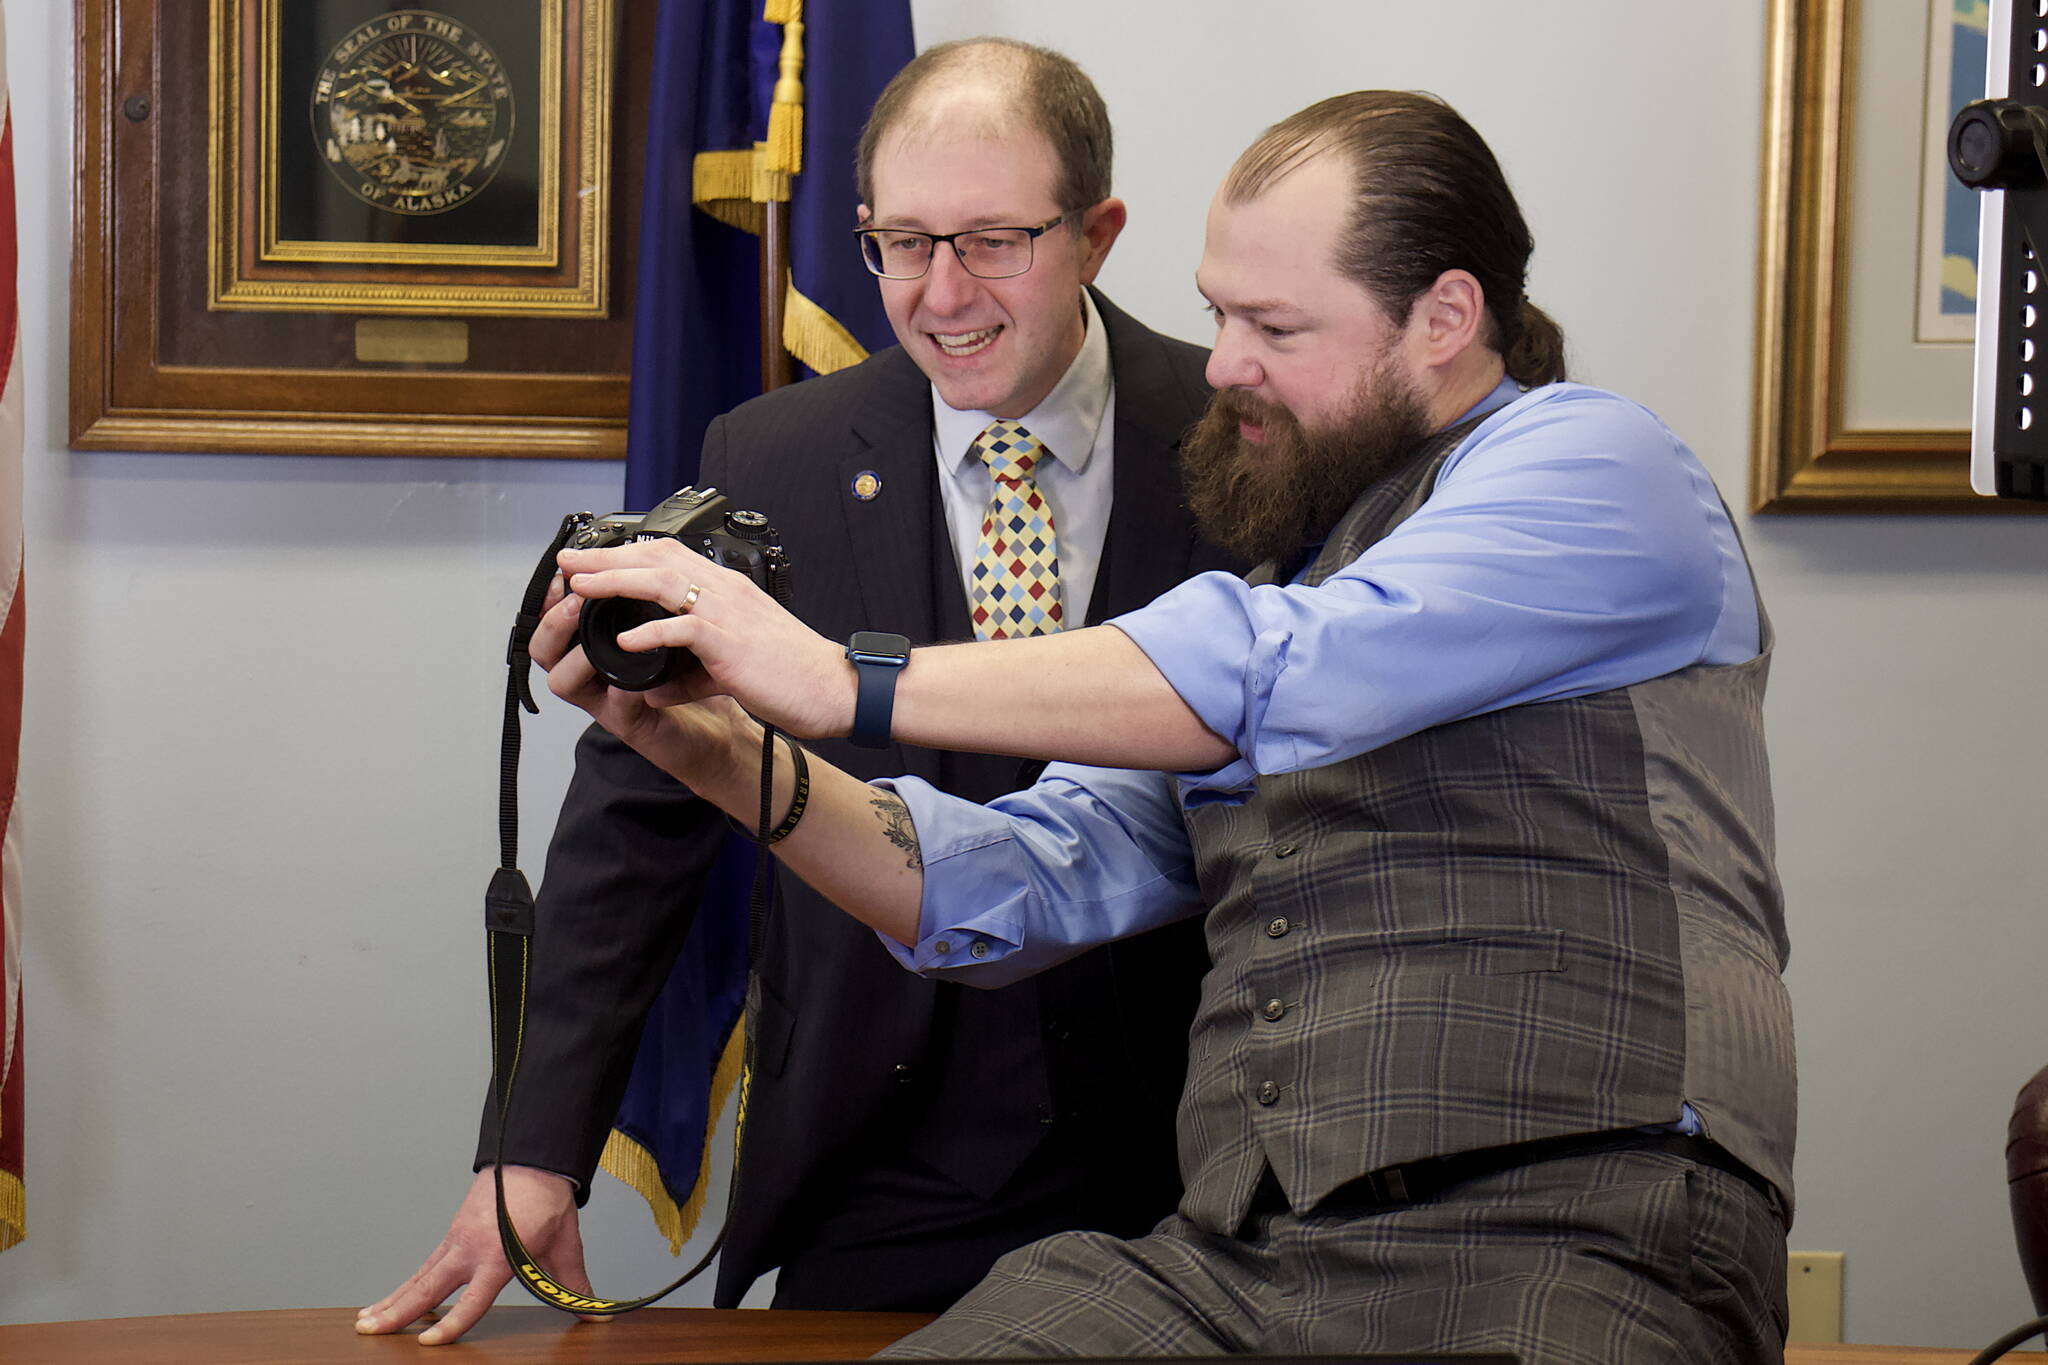 State Sen. Jesse Kiehl of Juneau, left, examines photos taken for his official portrait by Noah Hanson, communications director for the senate majority, in a meeting room at the Alaska State Capitol a few hours before the Senate gaveled in to officially start the 33rd Alaska State Legislature. (Mark Sabbatini / Juneau Empire) Alaska Senate Majority (Mark Sabbatini / Juneau Empire)